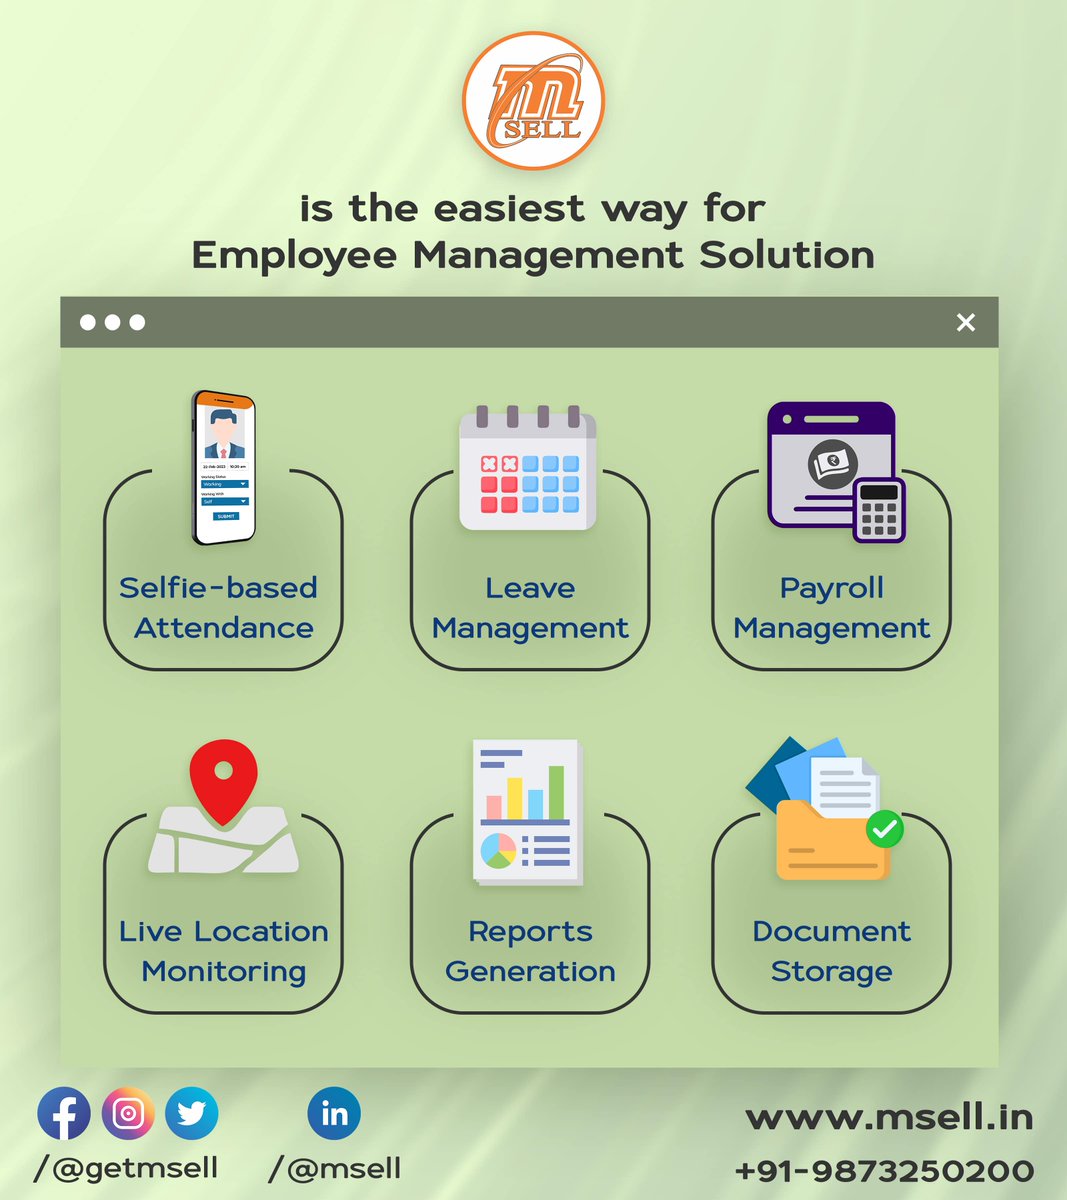 Efficiently manage your workforce with mSELL Employee Management Solution - streamline HR tasks, boost productivity, and enhance organizational performance.

Contact us directly @ +91-9873250200.

#employeemanagement #hrms #payrollmanagement #salesforceautomation #saas #fmcg #cpg